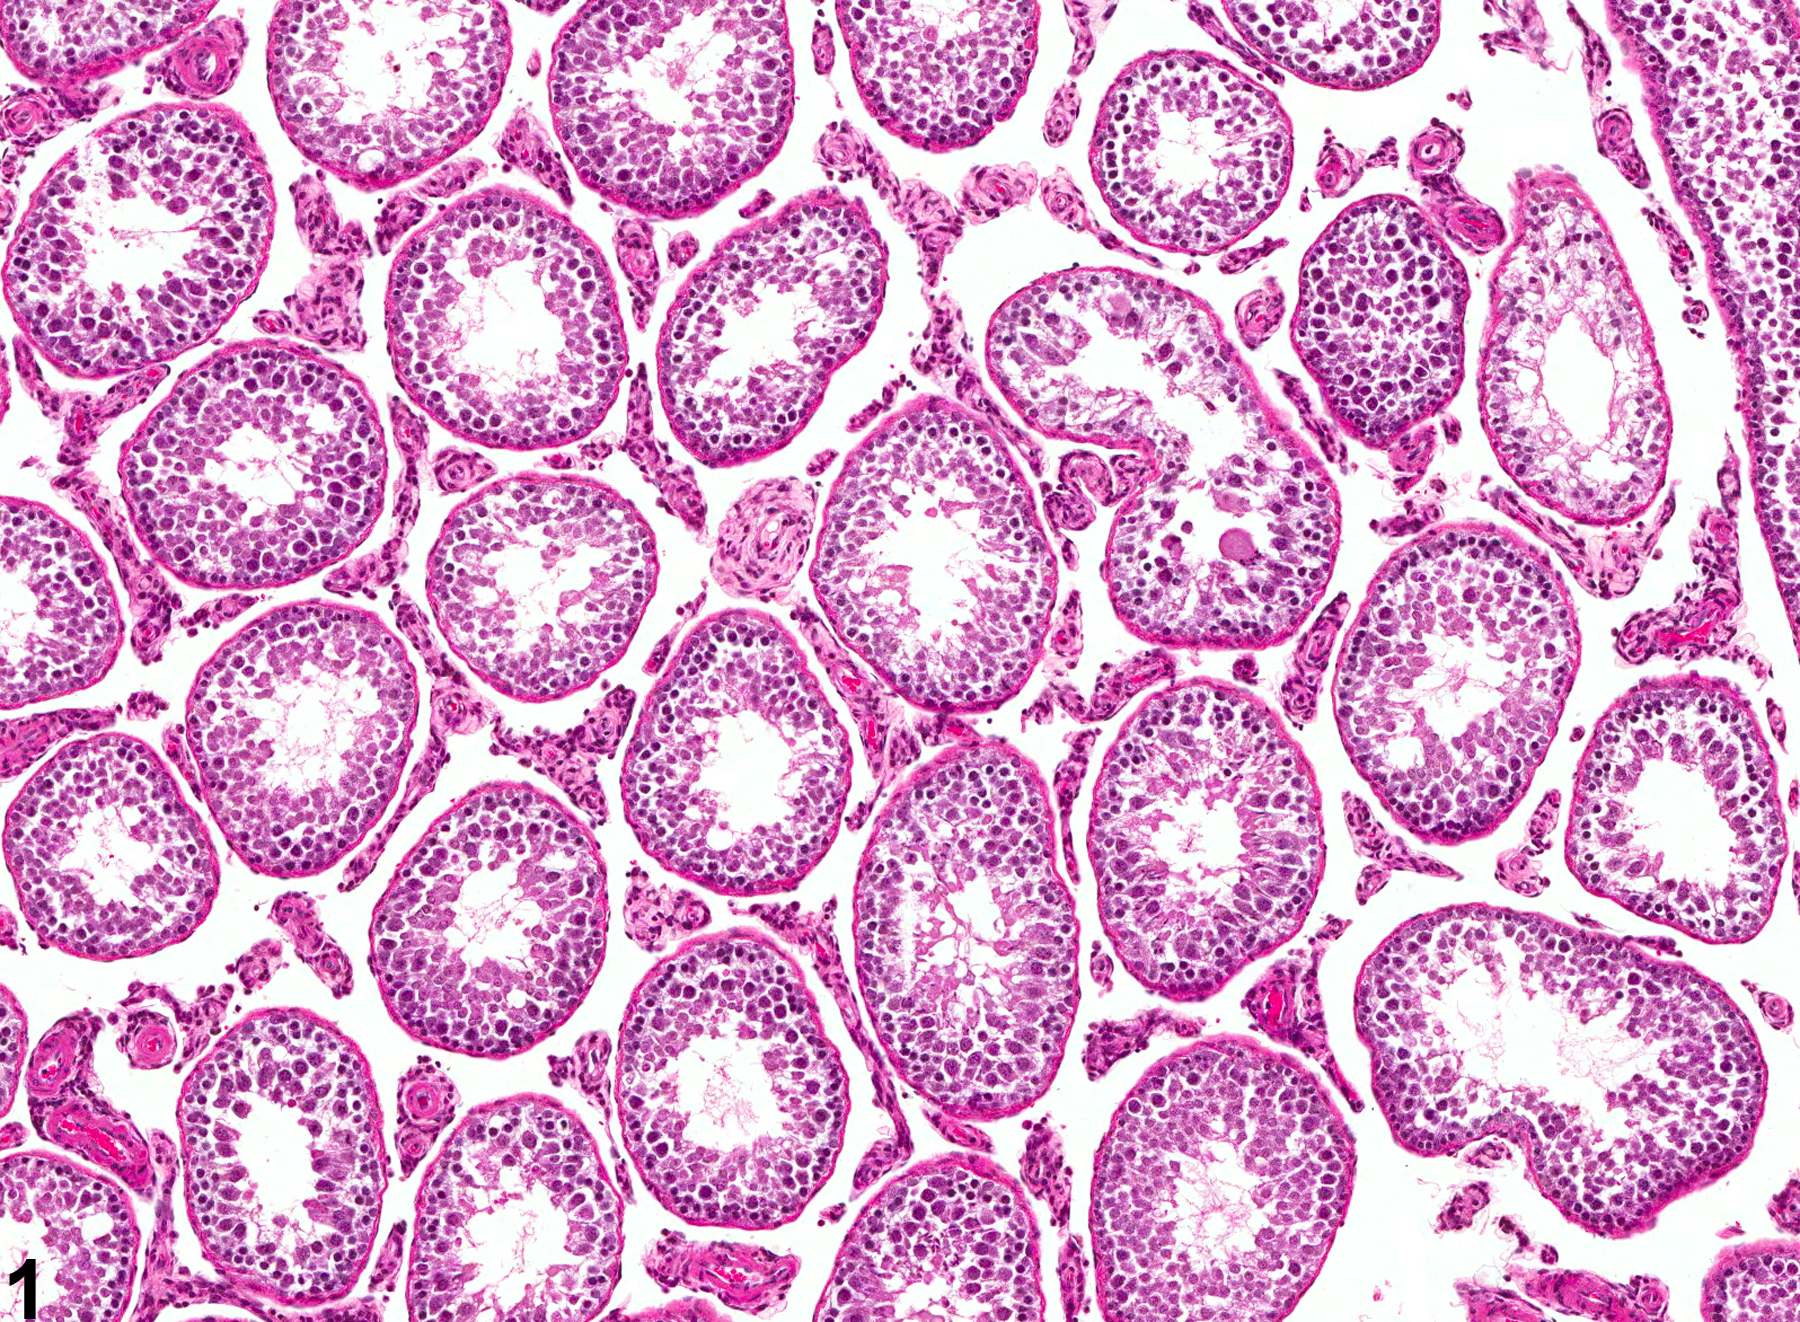 Image of germinal cell degeneration in the testis from a male F344/N rat in a chronic study